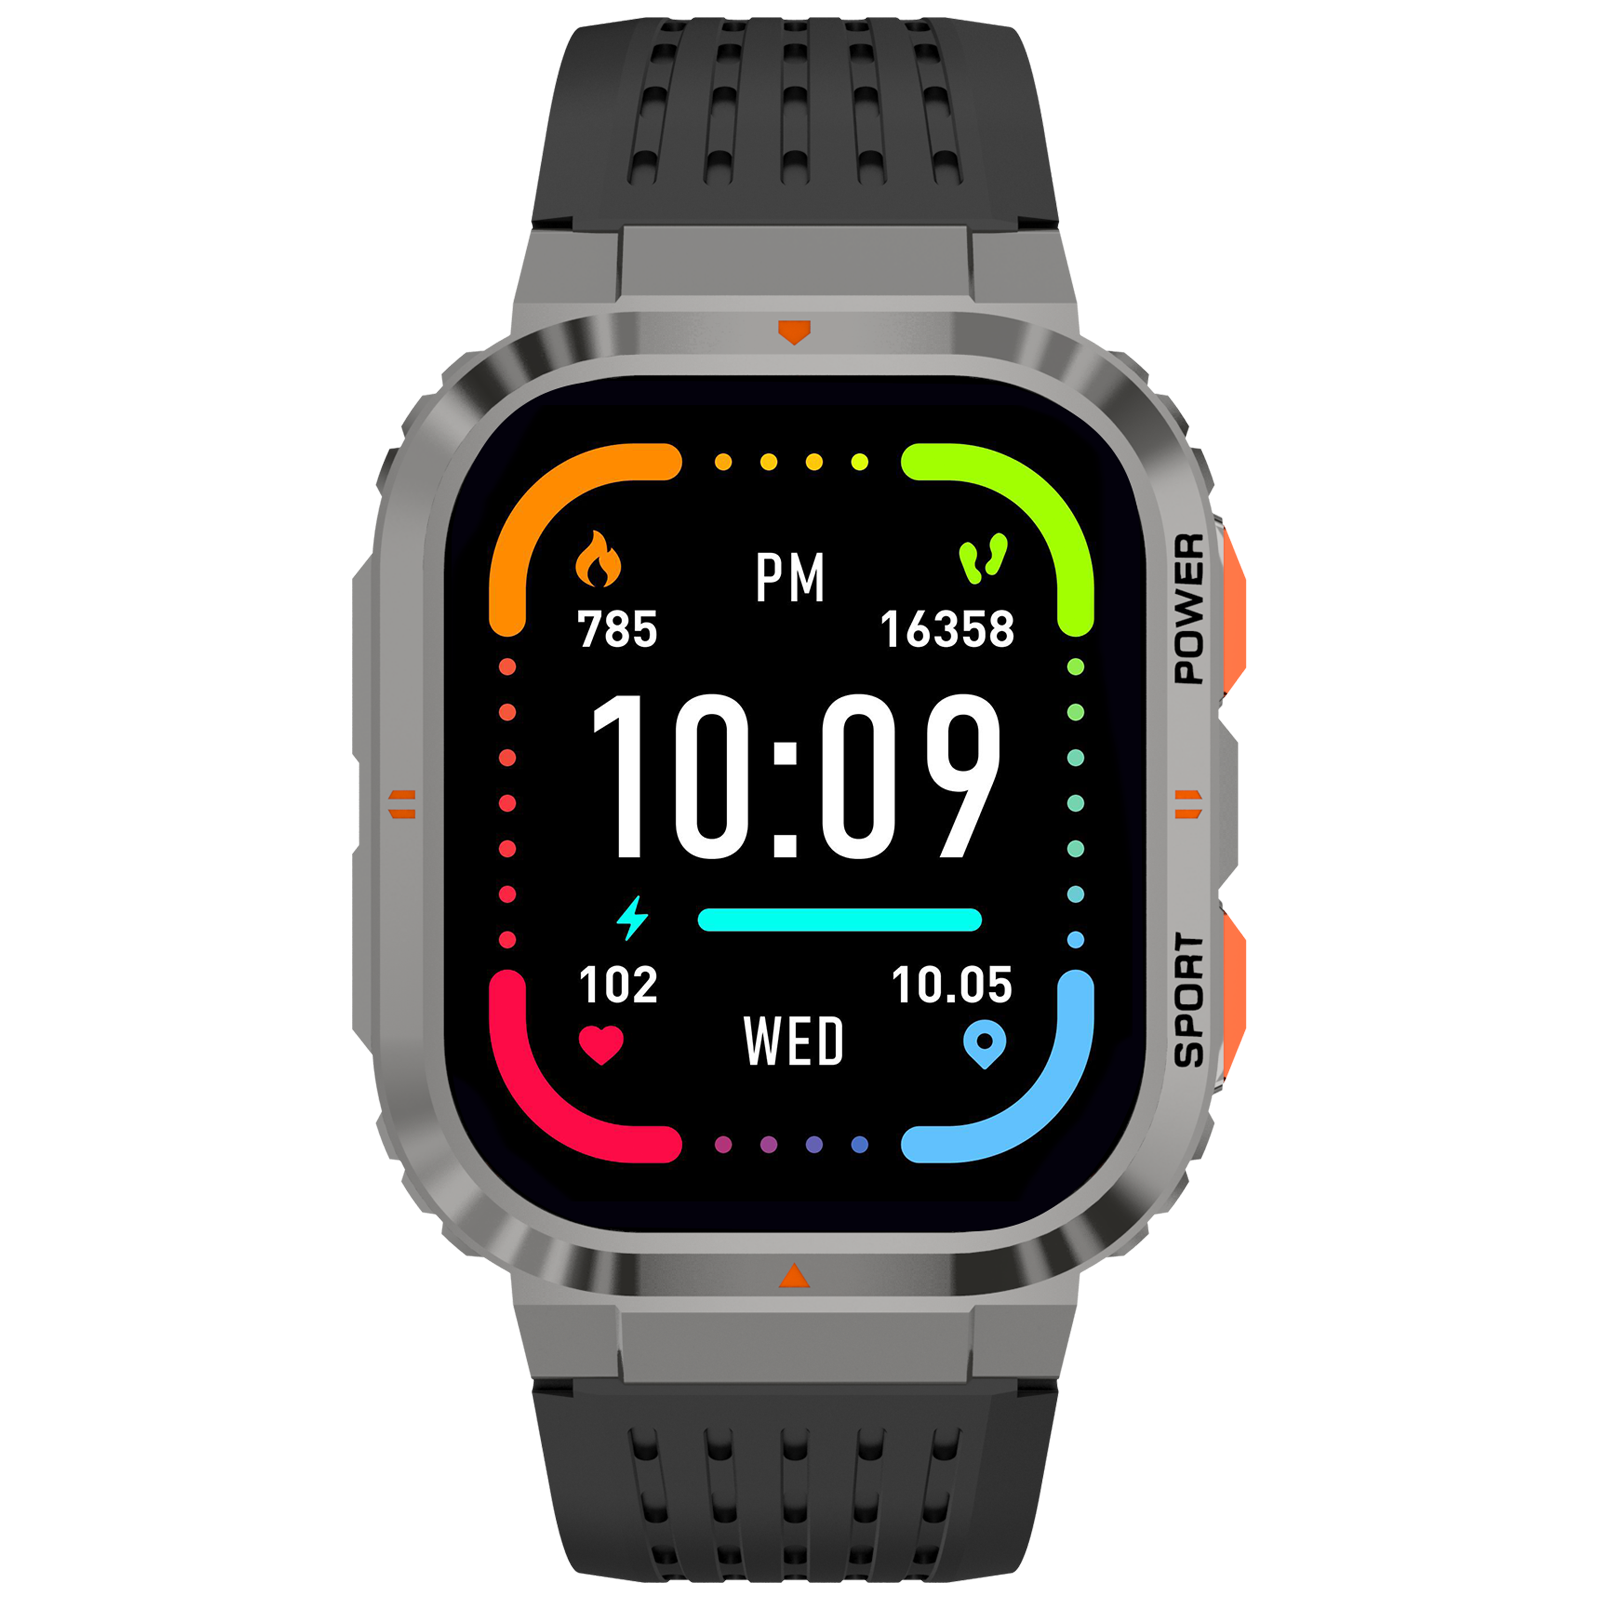 Croma STRIDE LB Smartwatch with Activity Tracker (42mm, TFT LCD Display, IP68 Water Resistant, Black Strap)